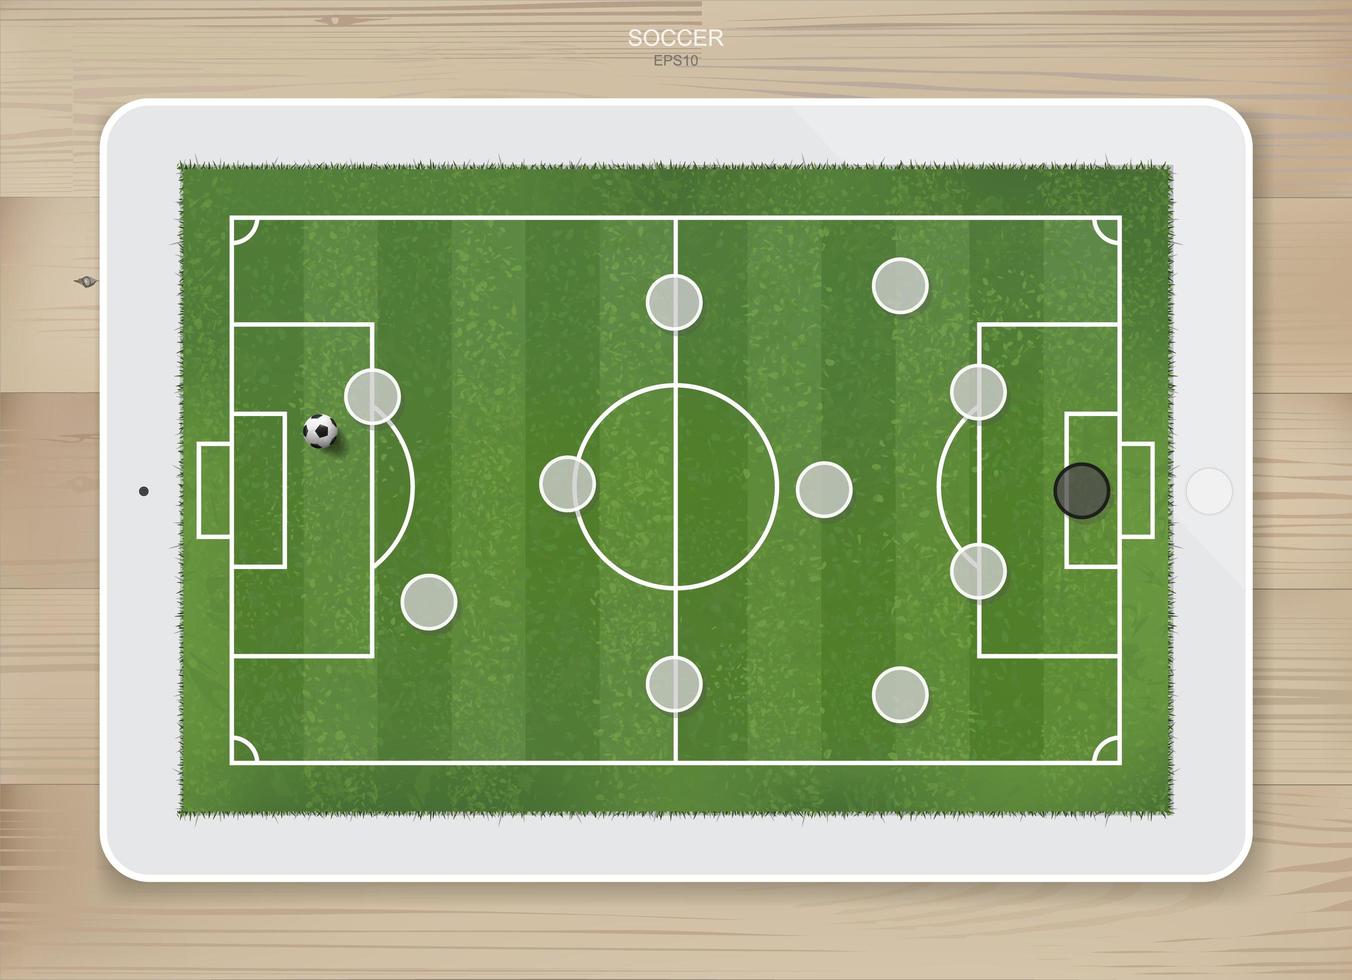 Soccer football game formation tactics on touch screen tablet vector